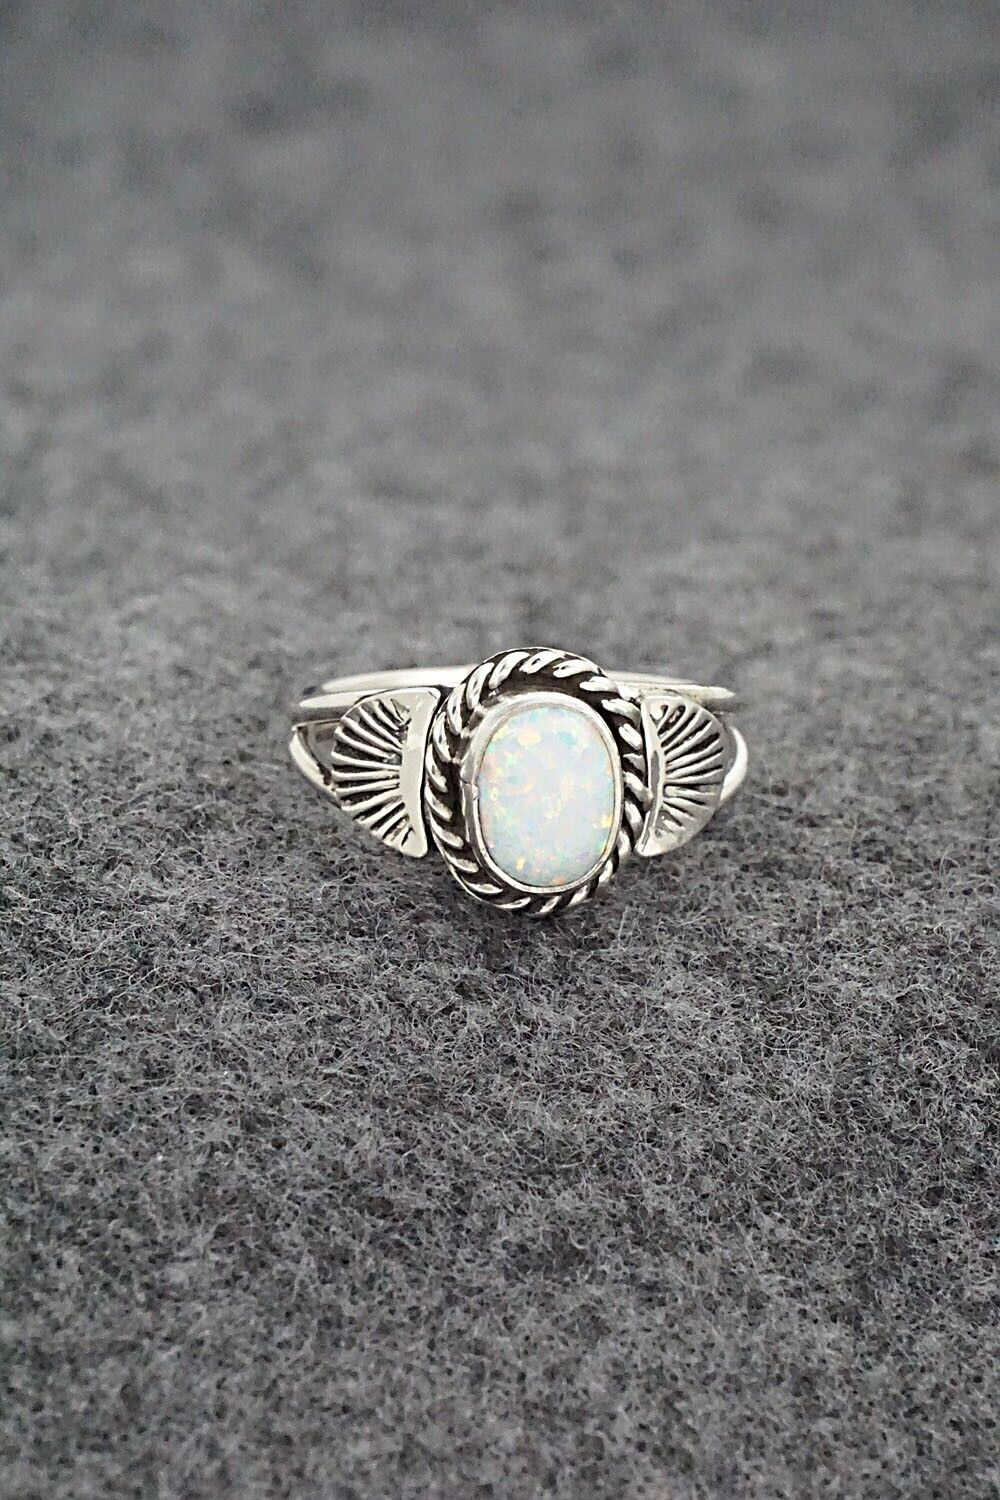 Opalite & Sterling Silver Ring - Jan Mariano - Size 6.5